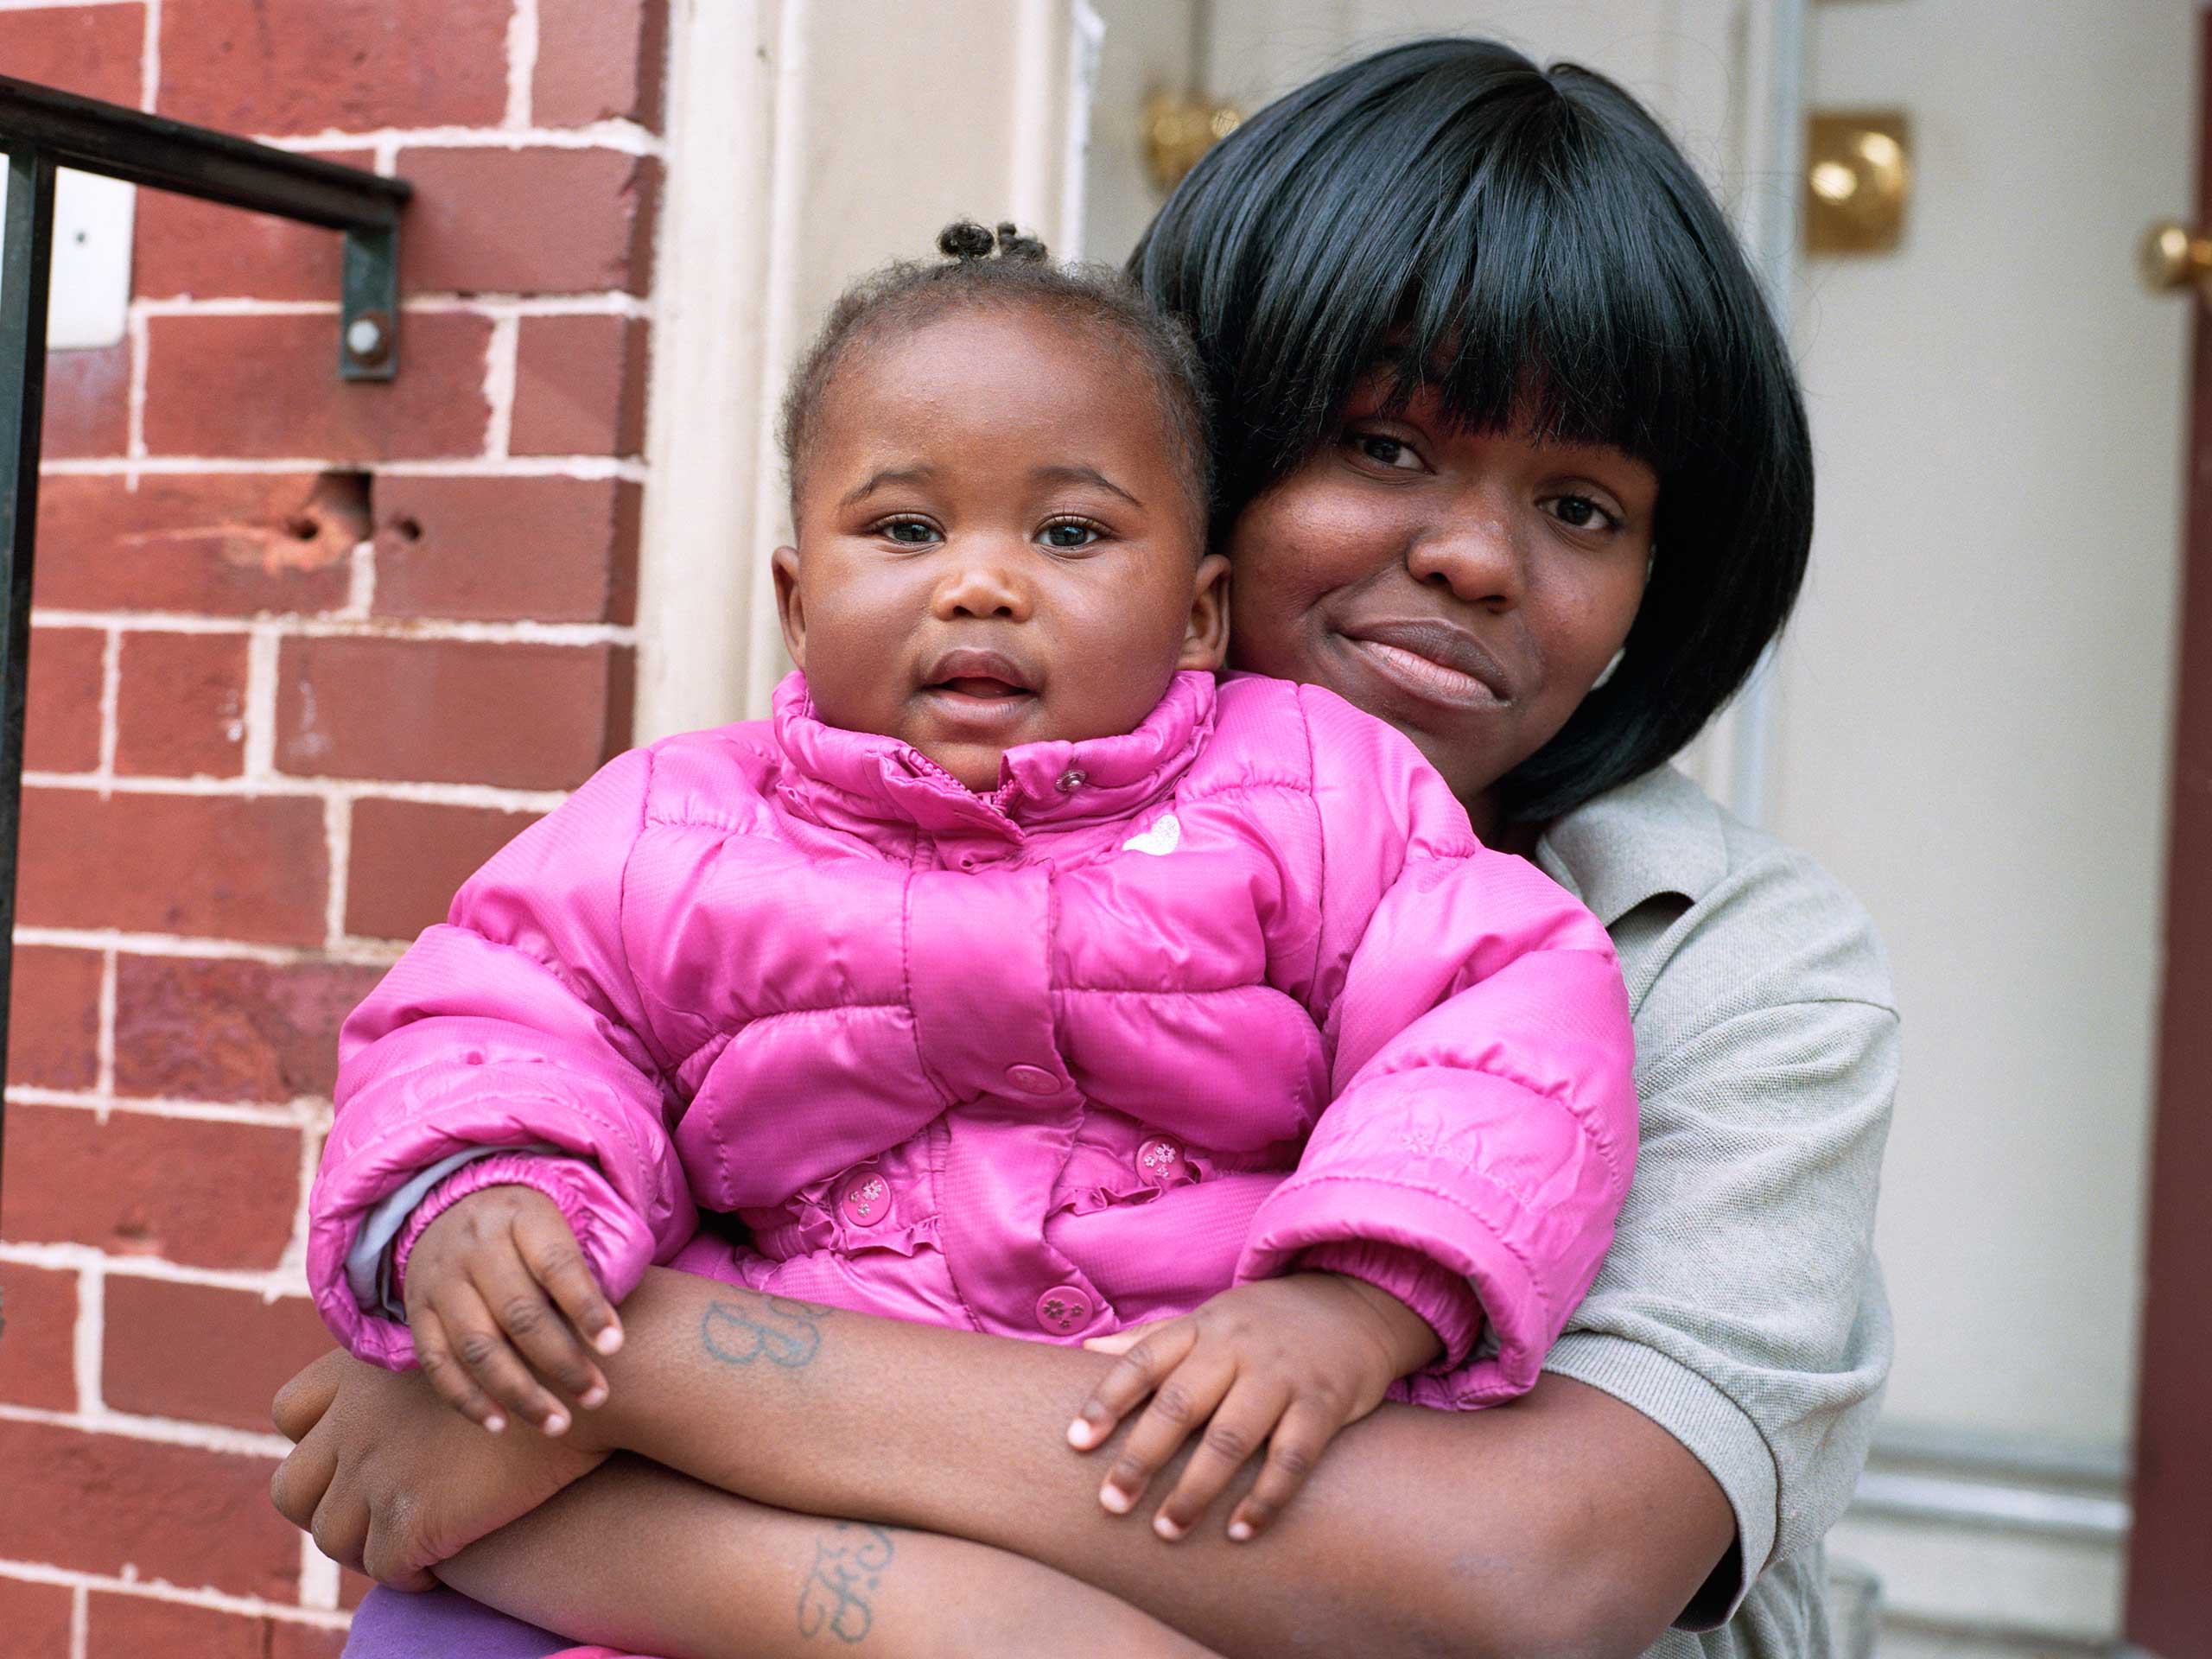 Taja Joyner, 20, with her one-year-old daughter Temari Price-Bay. Joyner moved around Baltimore a bit as a kid while her parents were between jobs and moved to Sandtown when she was 10. She currently lives with her boyfriend, who is Temari’s father, and works in the neighborhood at Dollar General. “I got that job because I just needed something to help pay for my classes for school. Now I’m looking for scholarships to help. I want to own my own non-profit organization. I want a non-profit that helps needy families find affordable housing and jobs.”